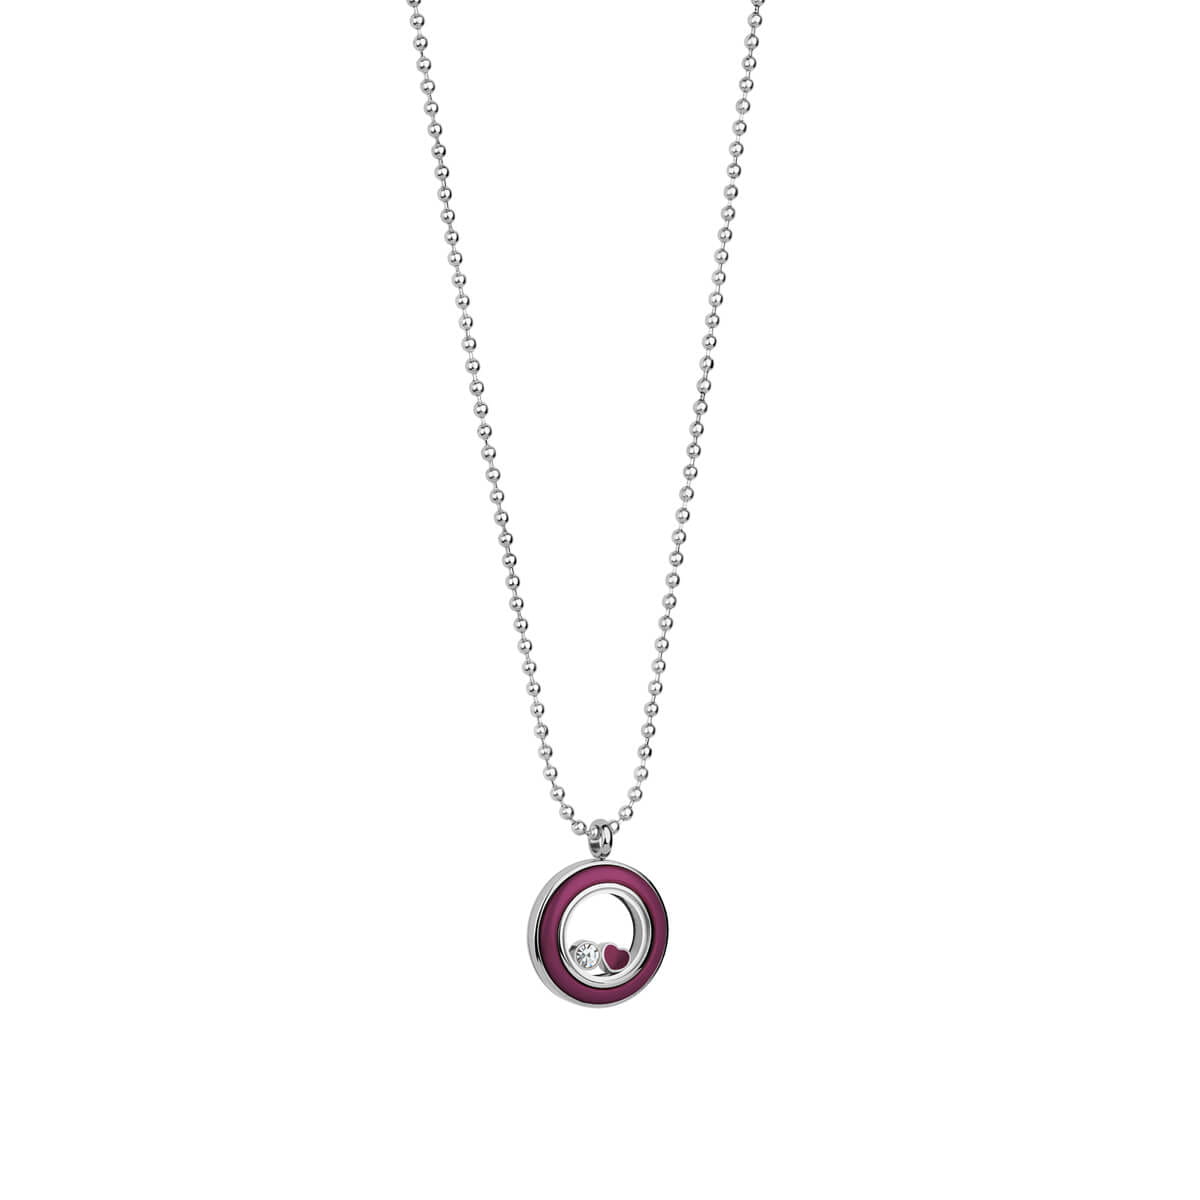 Bering Collier Edelstahl Emaille Lila 315-110-05